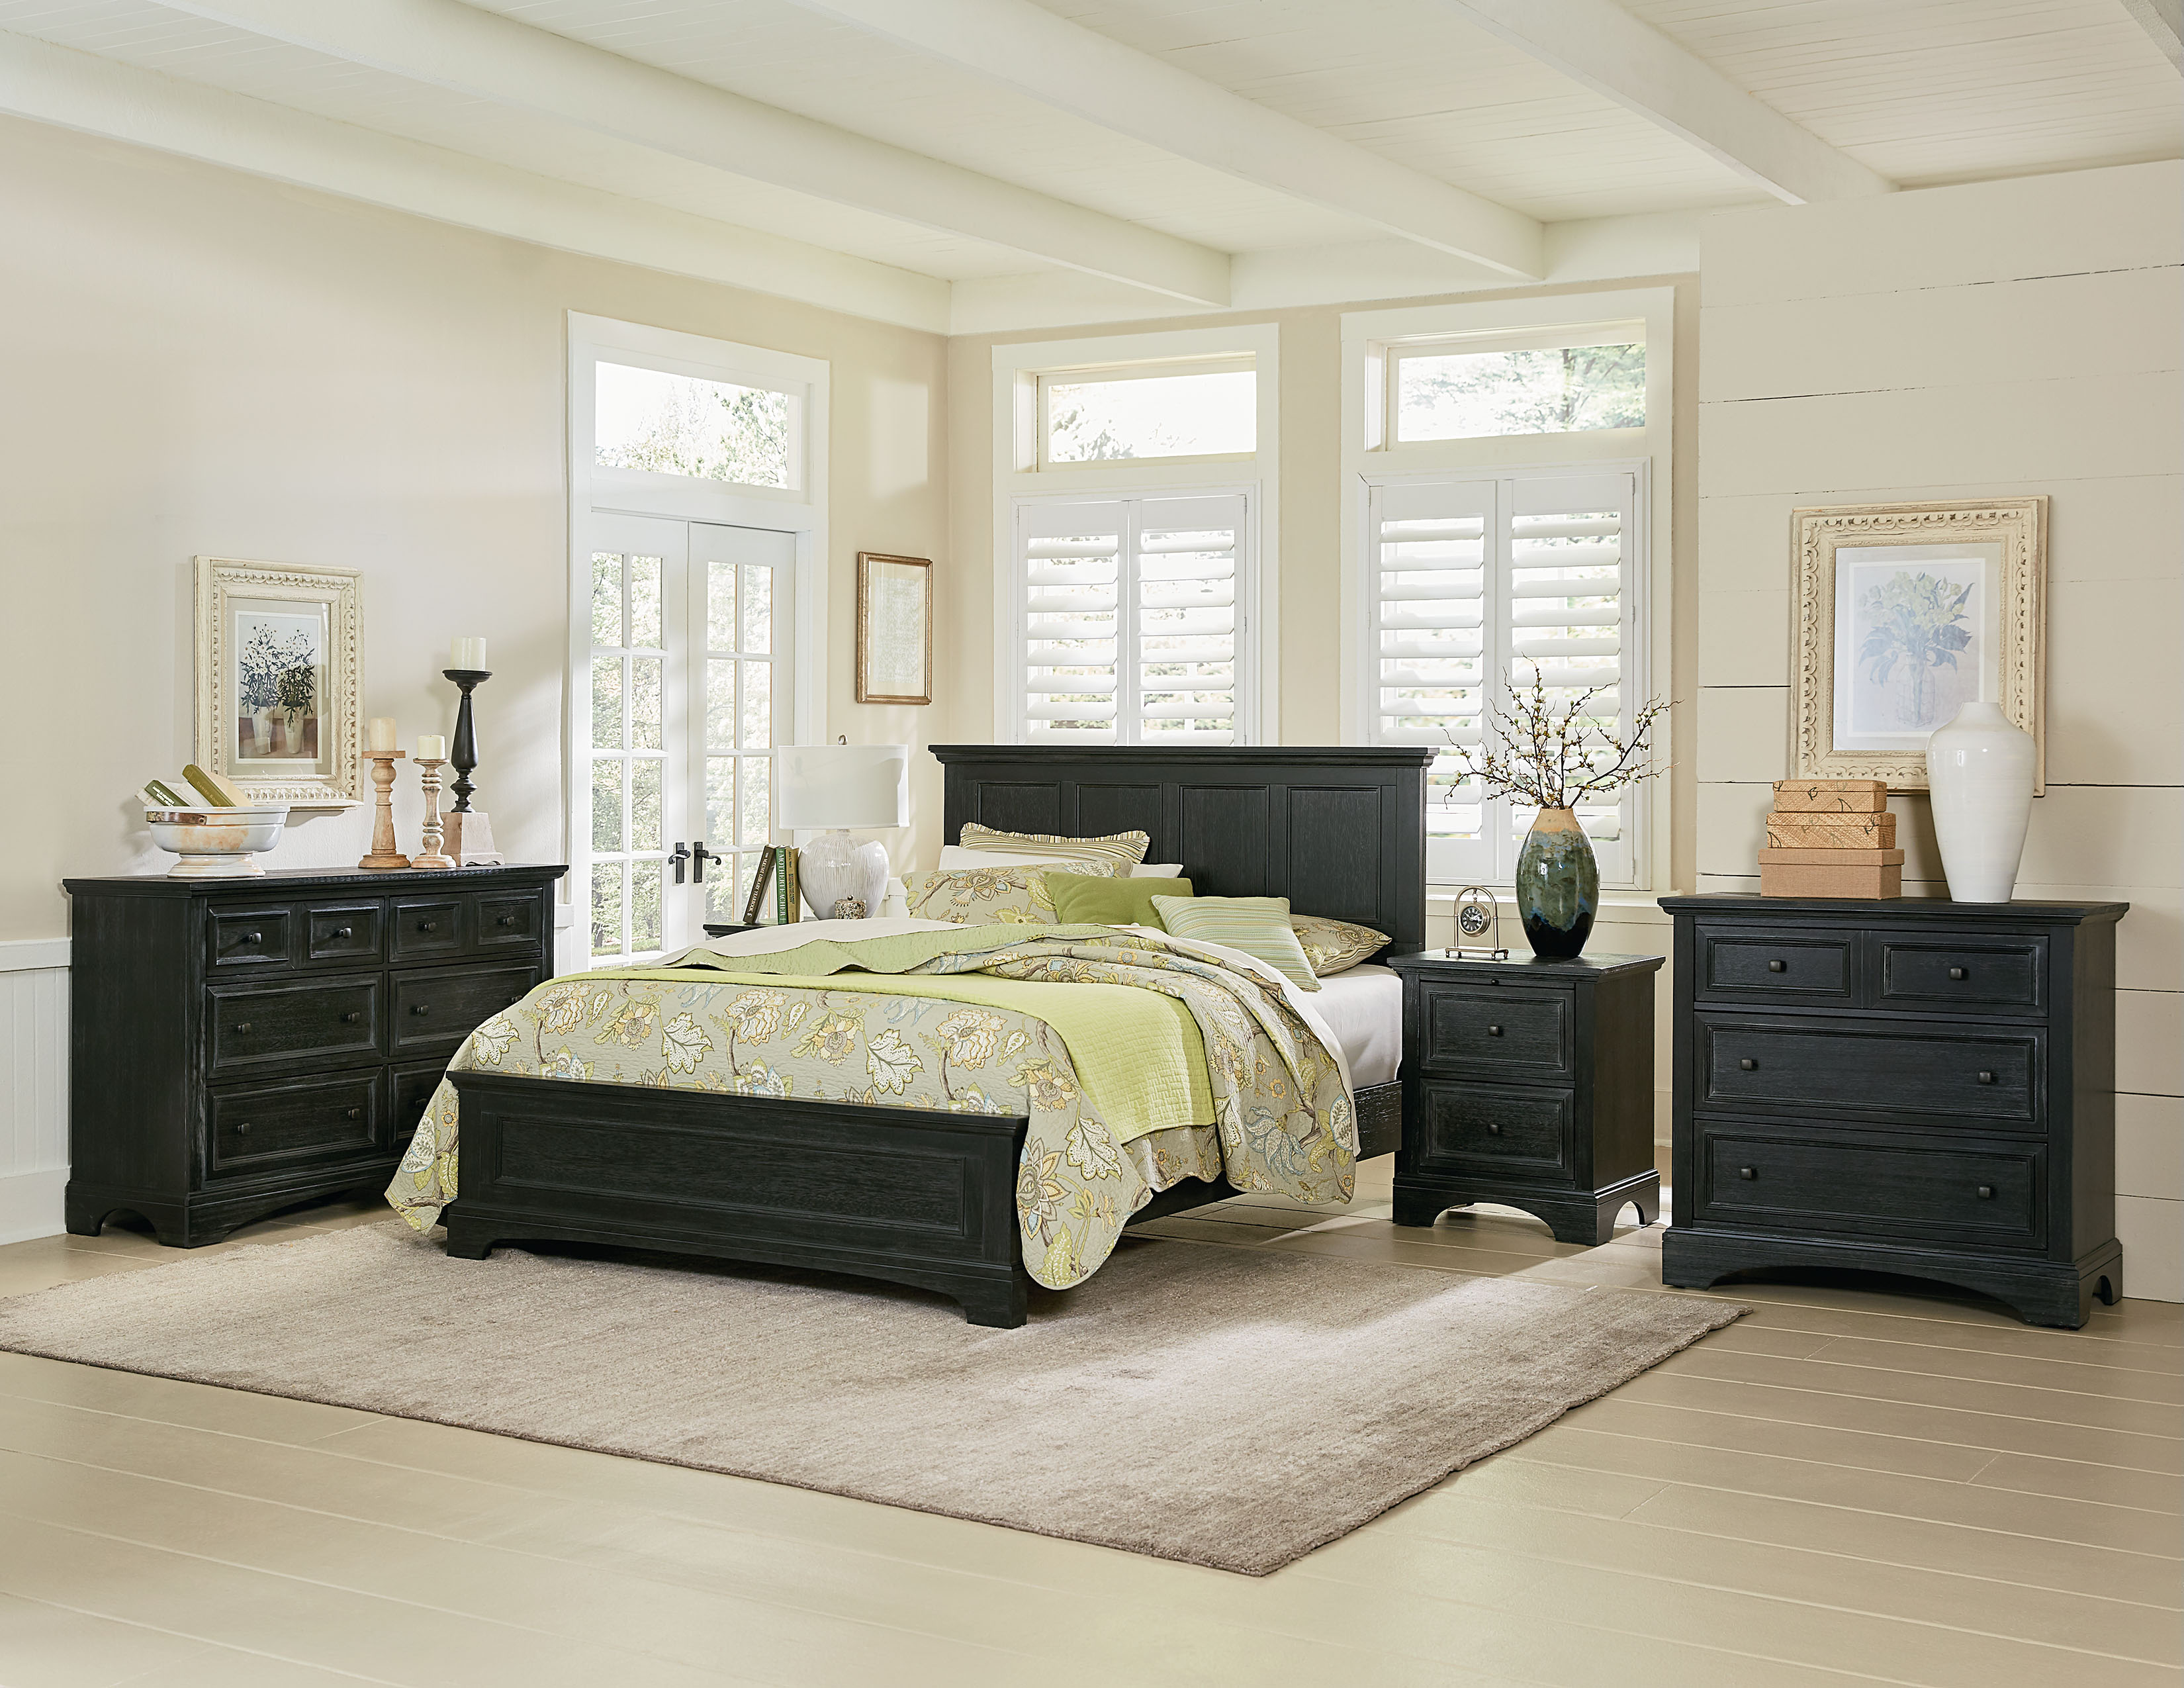 OSP Home Furnishings Farmhouse Basics King Bedroom Set with 2 Nightstands and 1 Dresser in Rustic Black Finish 7/CTN - image 1 of 15